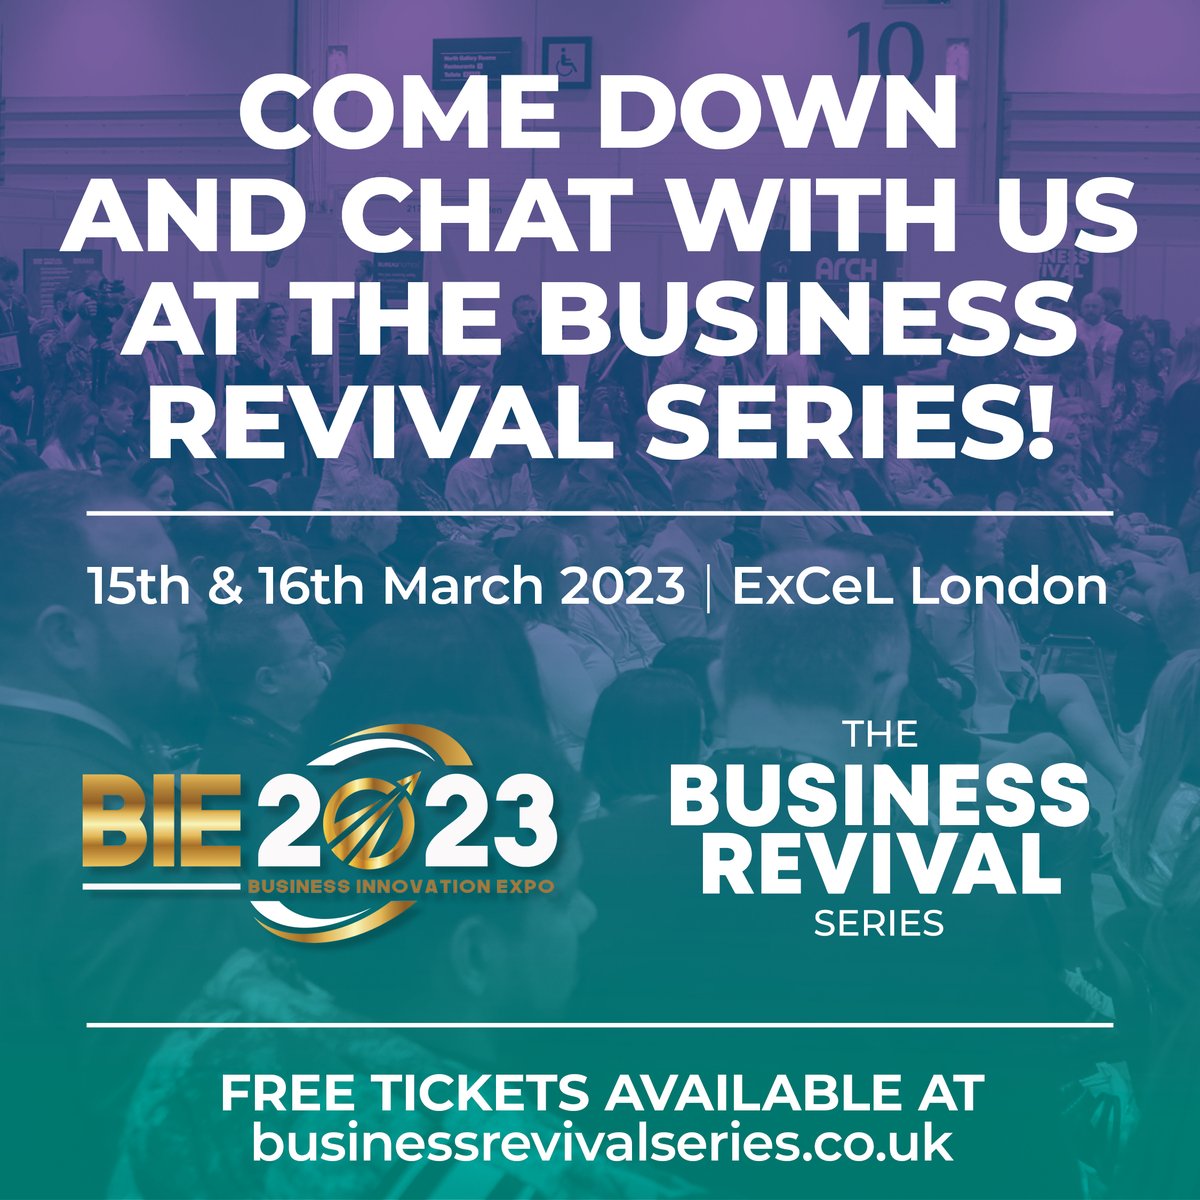 Fun news! We are exhibiting at another not-to-be-missed business show next month. Visit our exhibit on the 15th & 16th of March. Secure your free ticket online: businessrevivalseries.co.uk 

#business #sme #startups #networking #businessinnovation #eventslondon  #BIE23 #BRS23